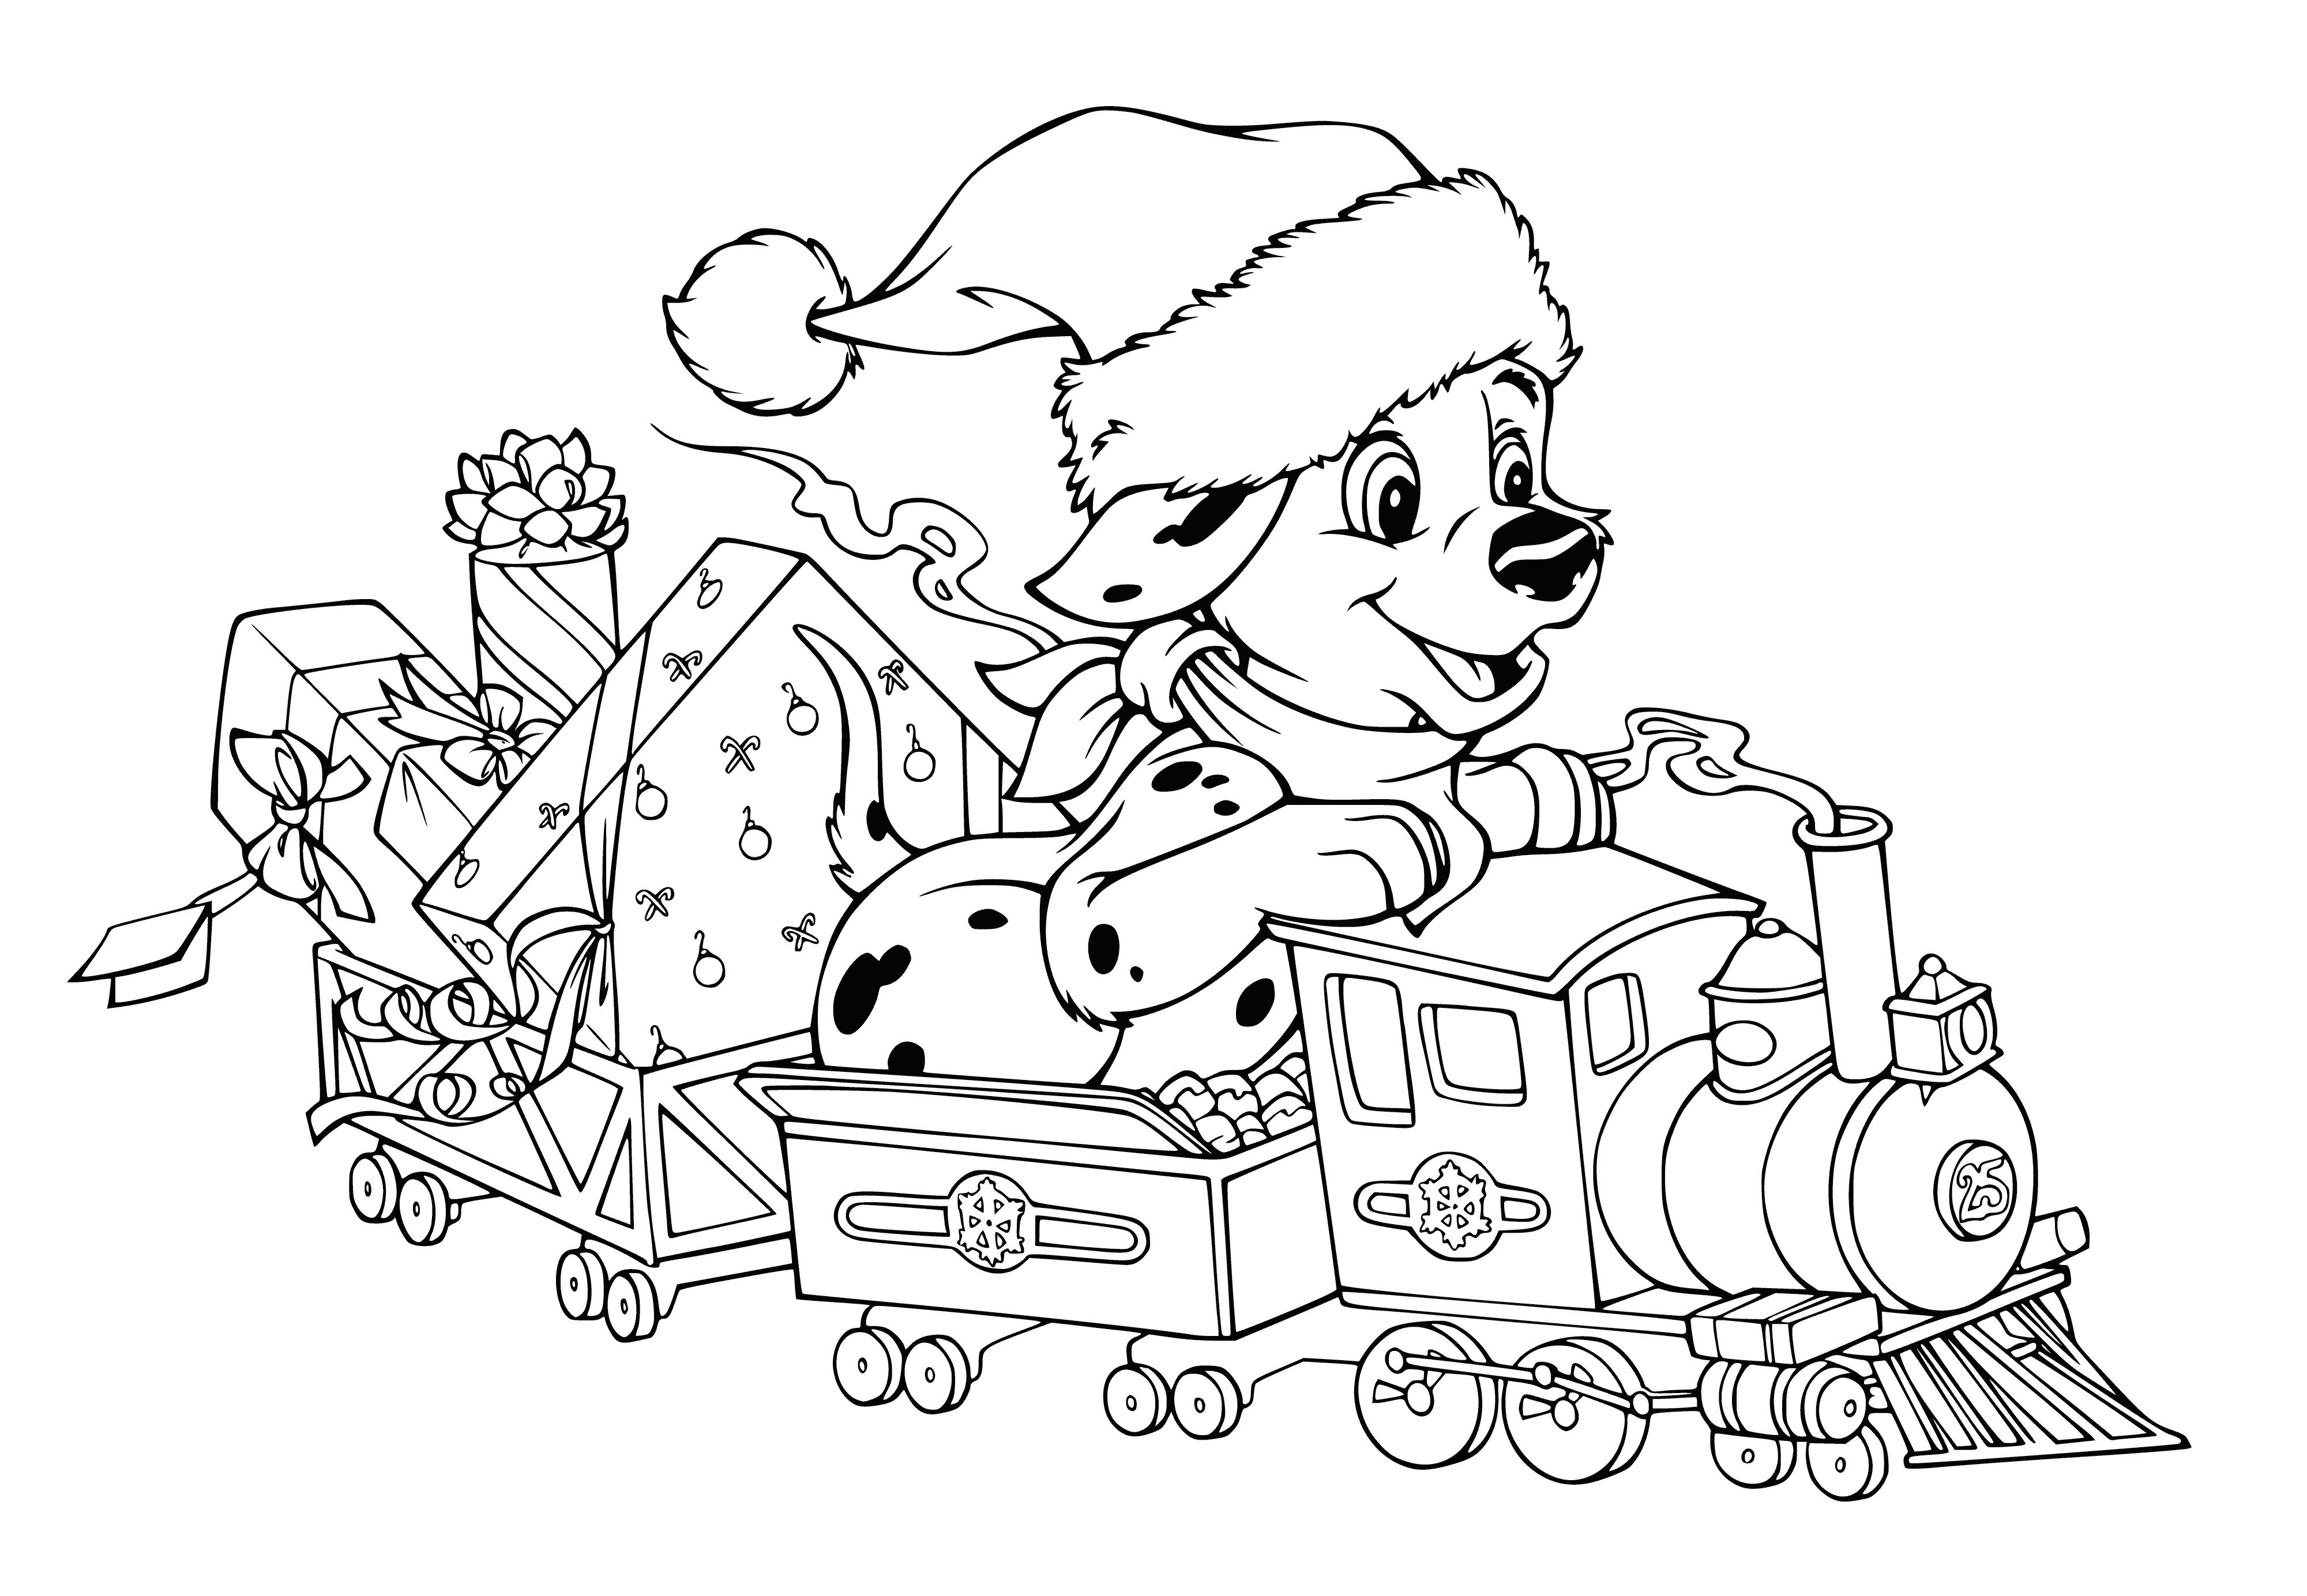 Disney characters celebrate New Year on a train w/ gifts, eagerly awaiting the coming year!